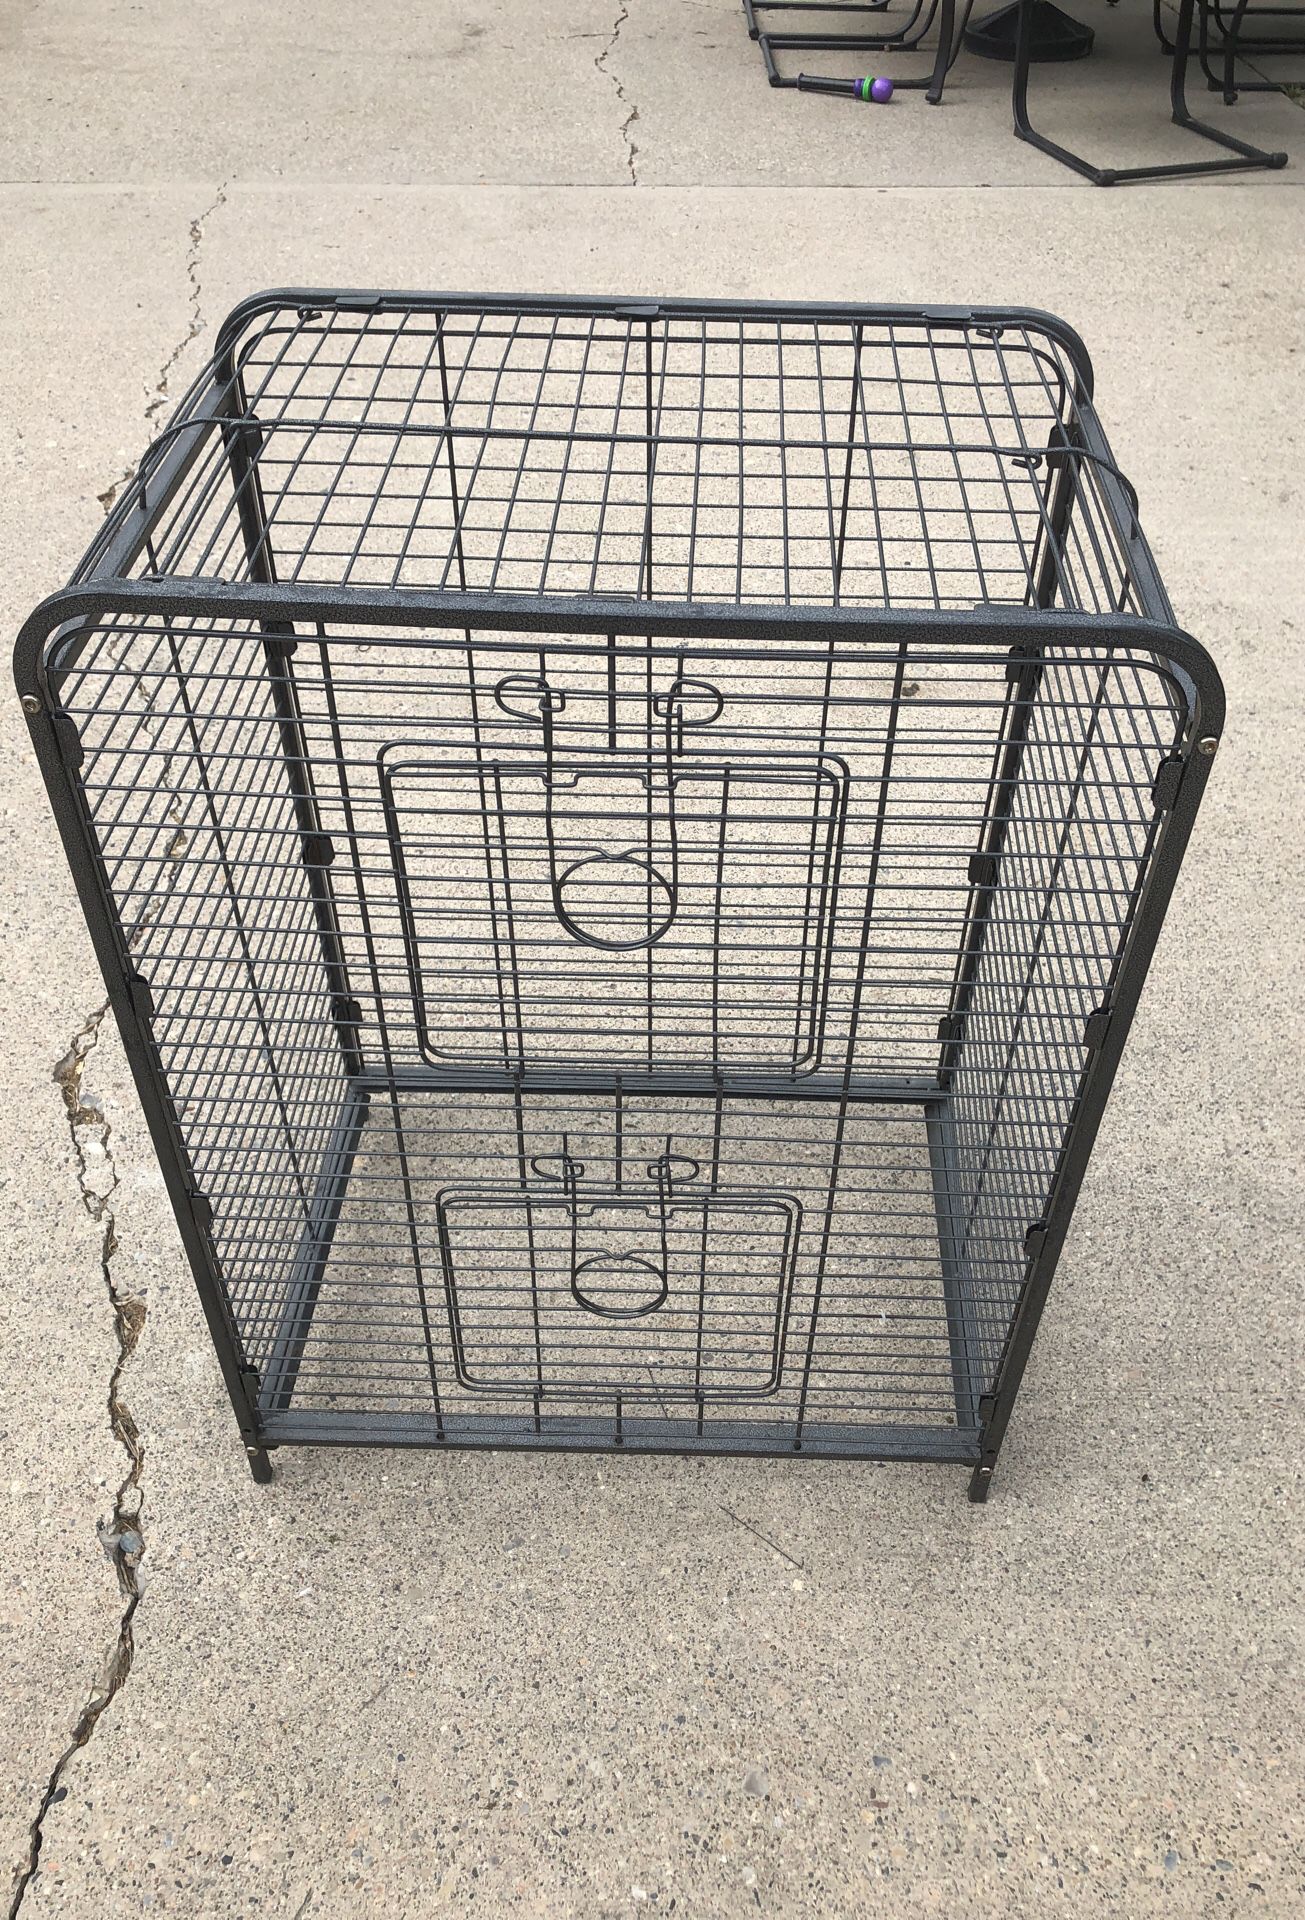 Small pet or bird cage